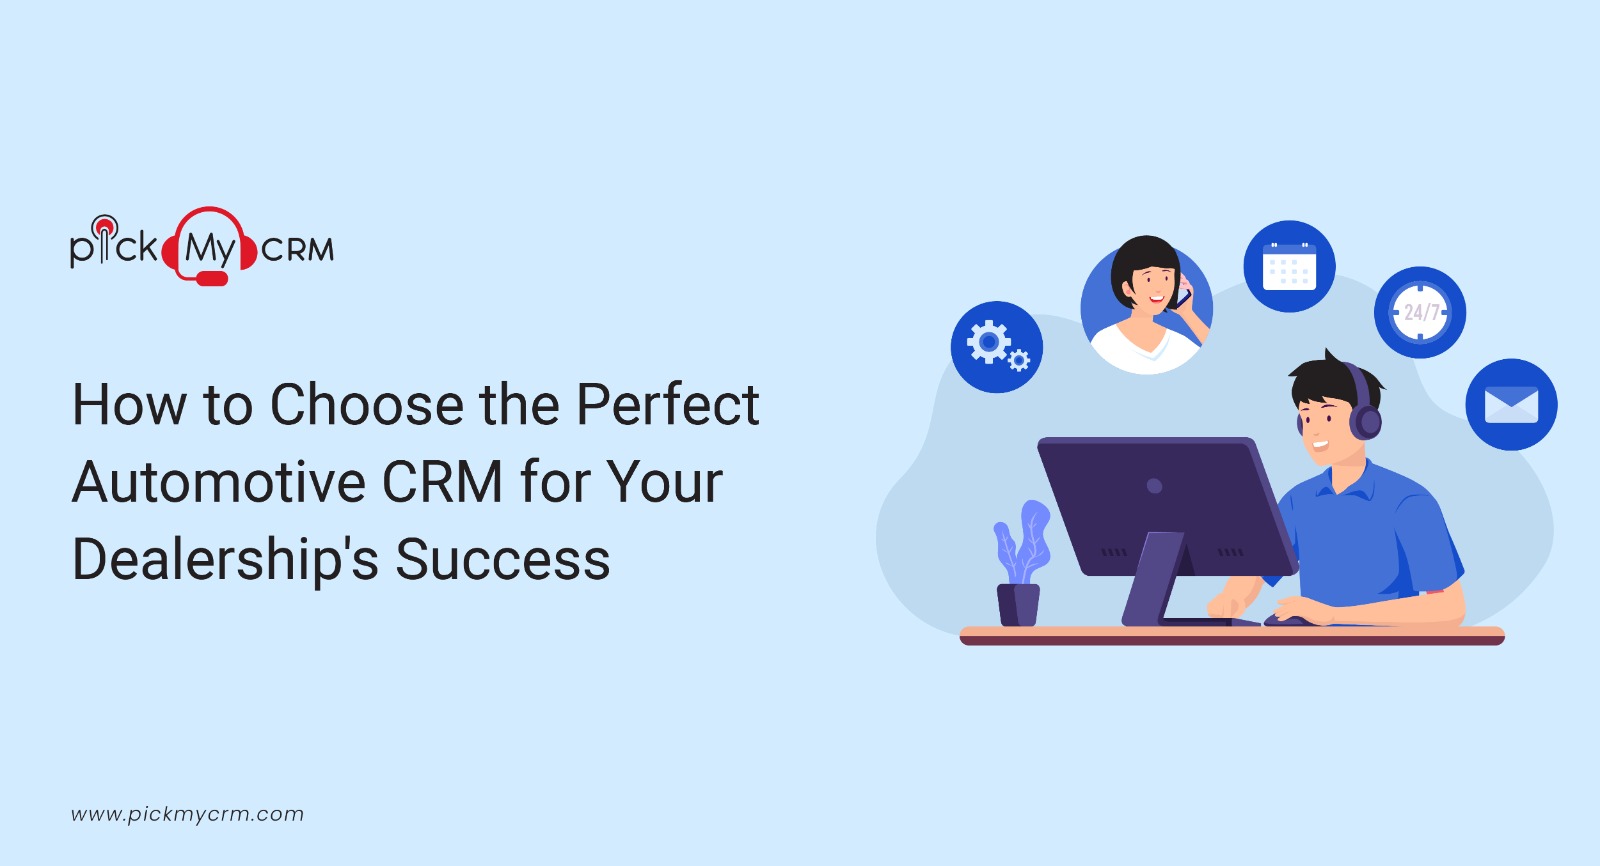 How to Choose the Perfect Automotive CRM for Your Dealership’s Success